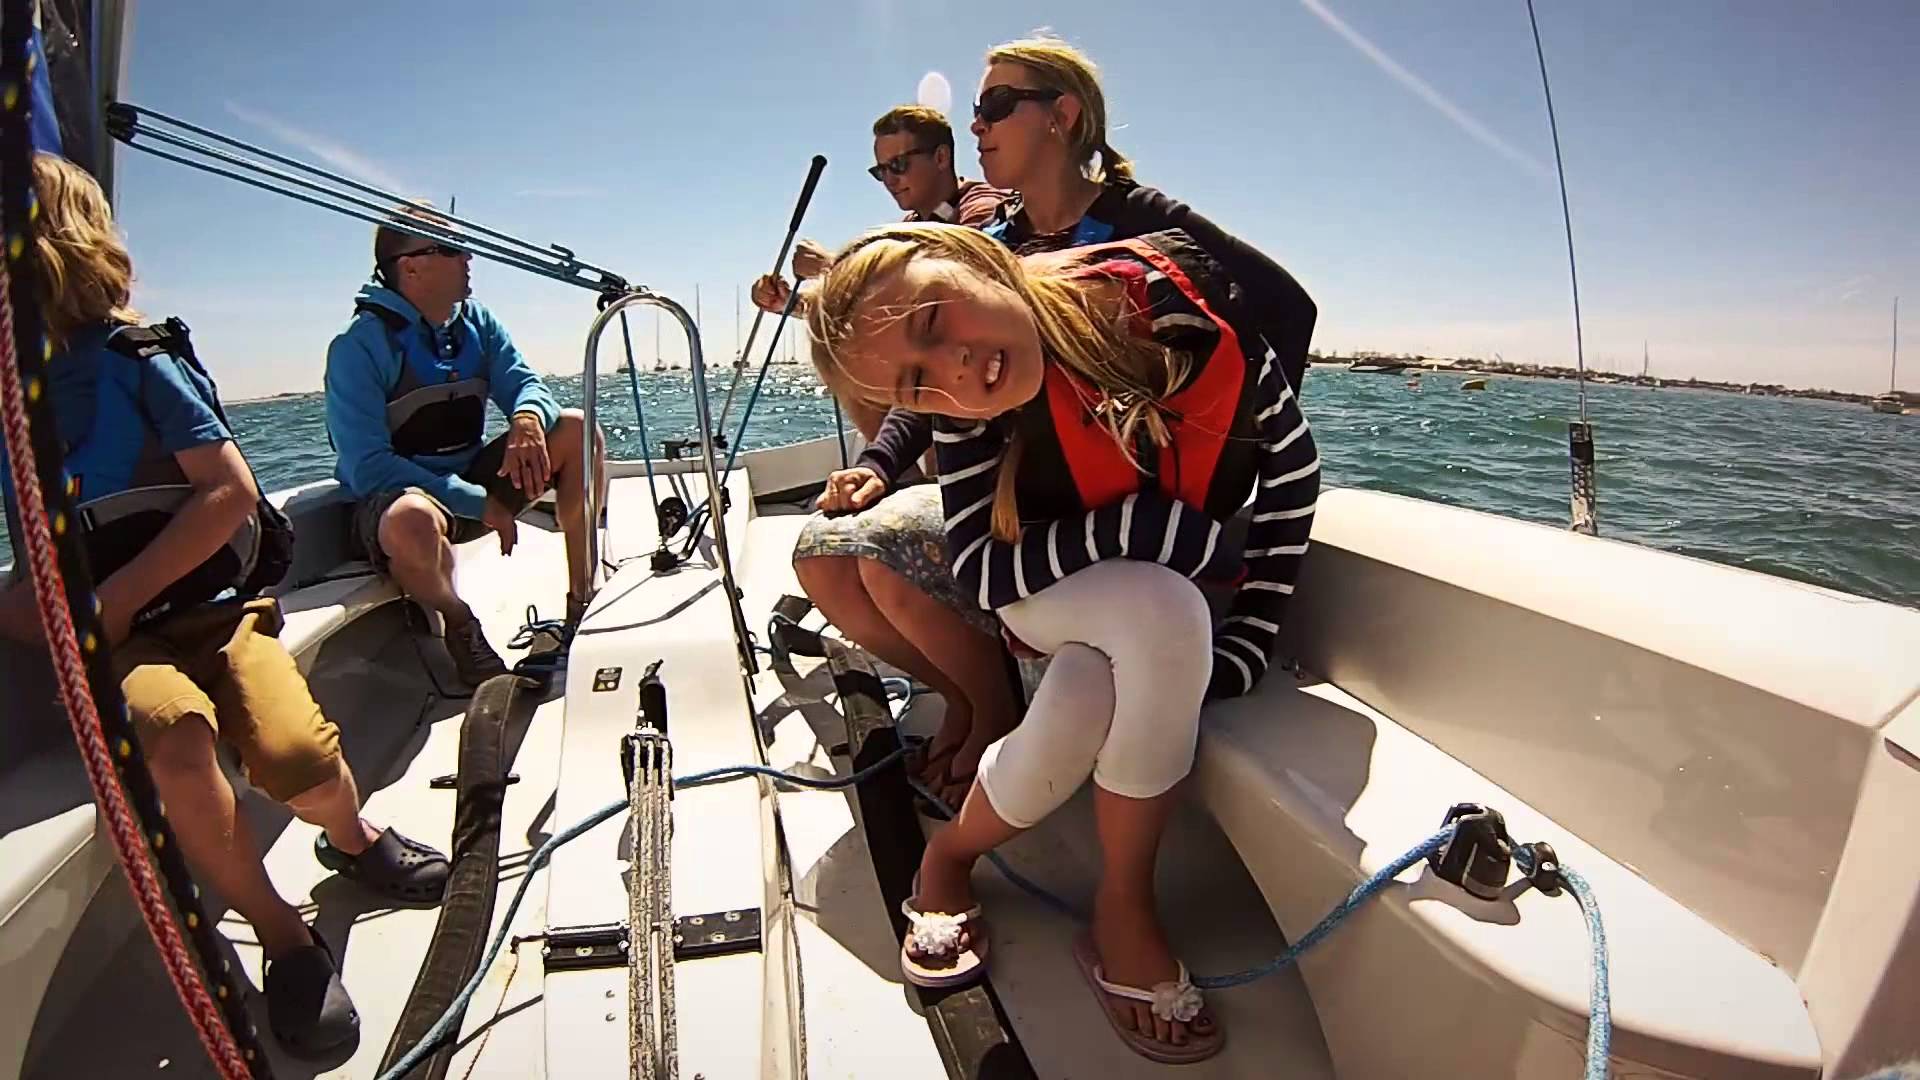 Volvo Sailing Academy – Get out on the water this summer! – 2014